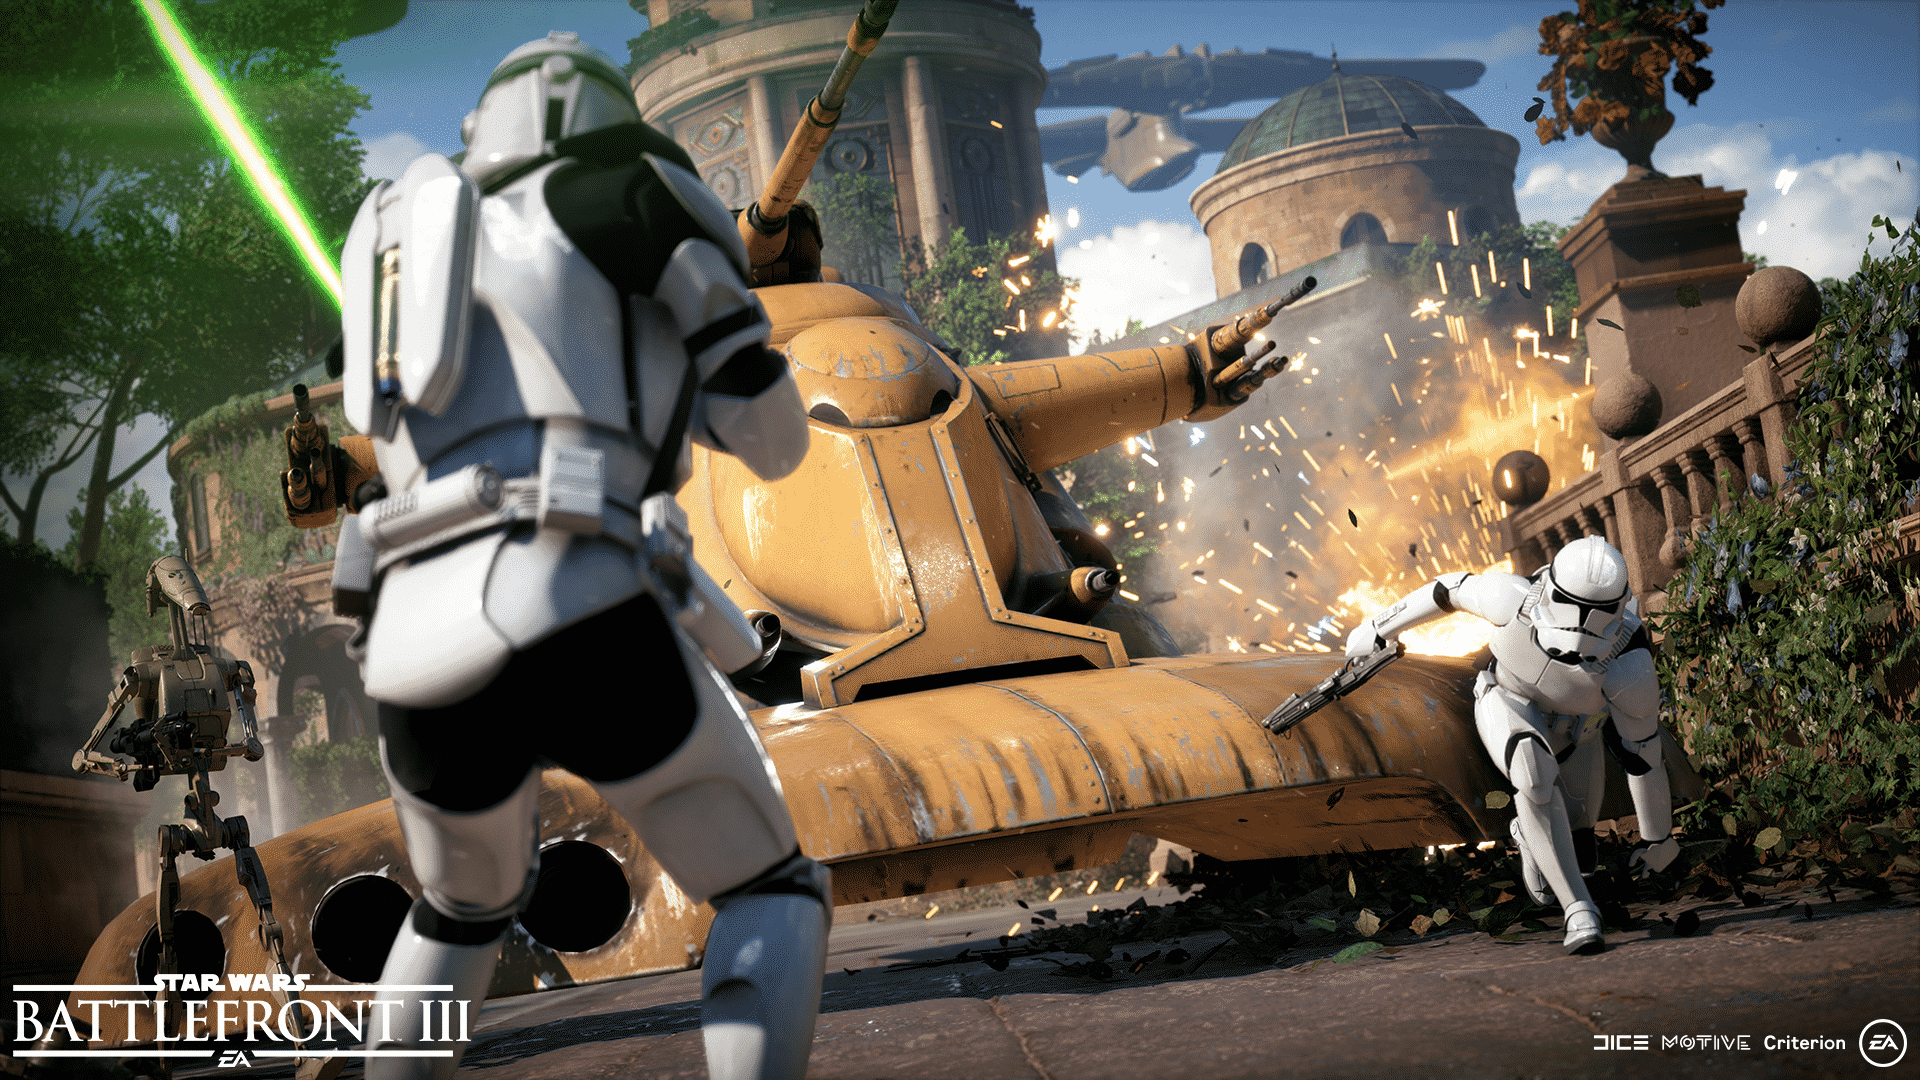 If Battlefront 3 were announced, would the hype boost Battlefront